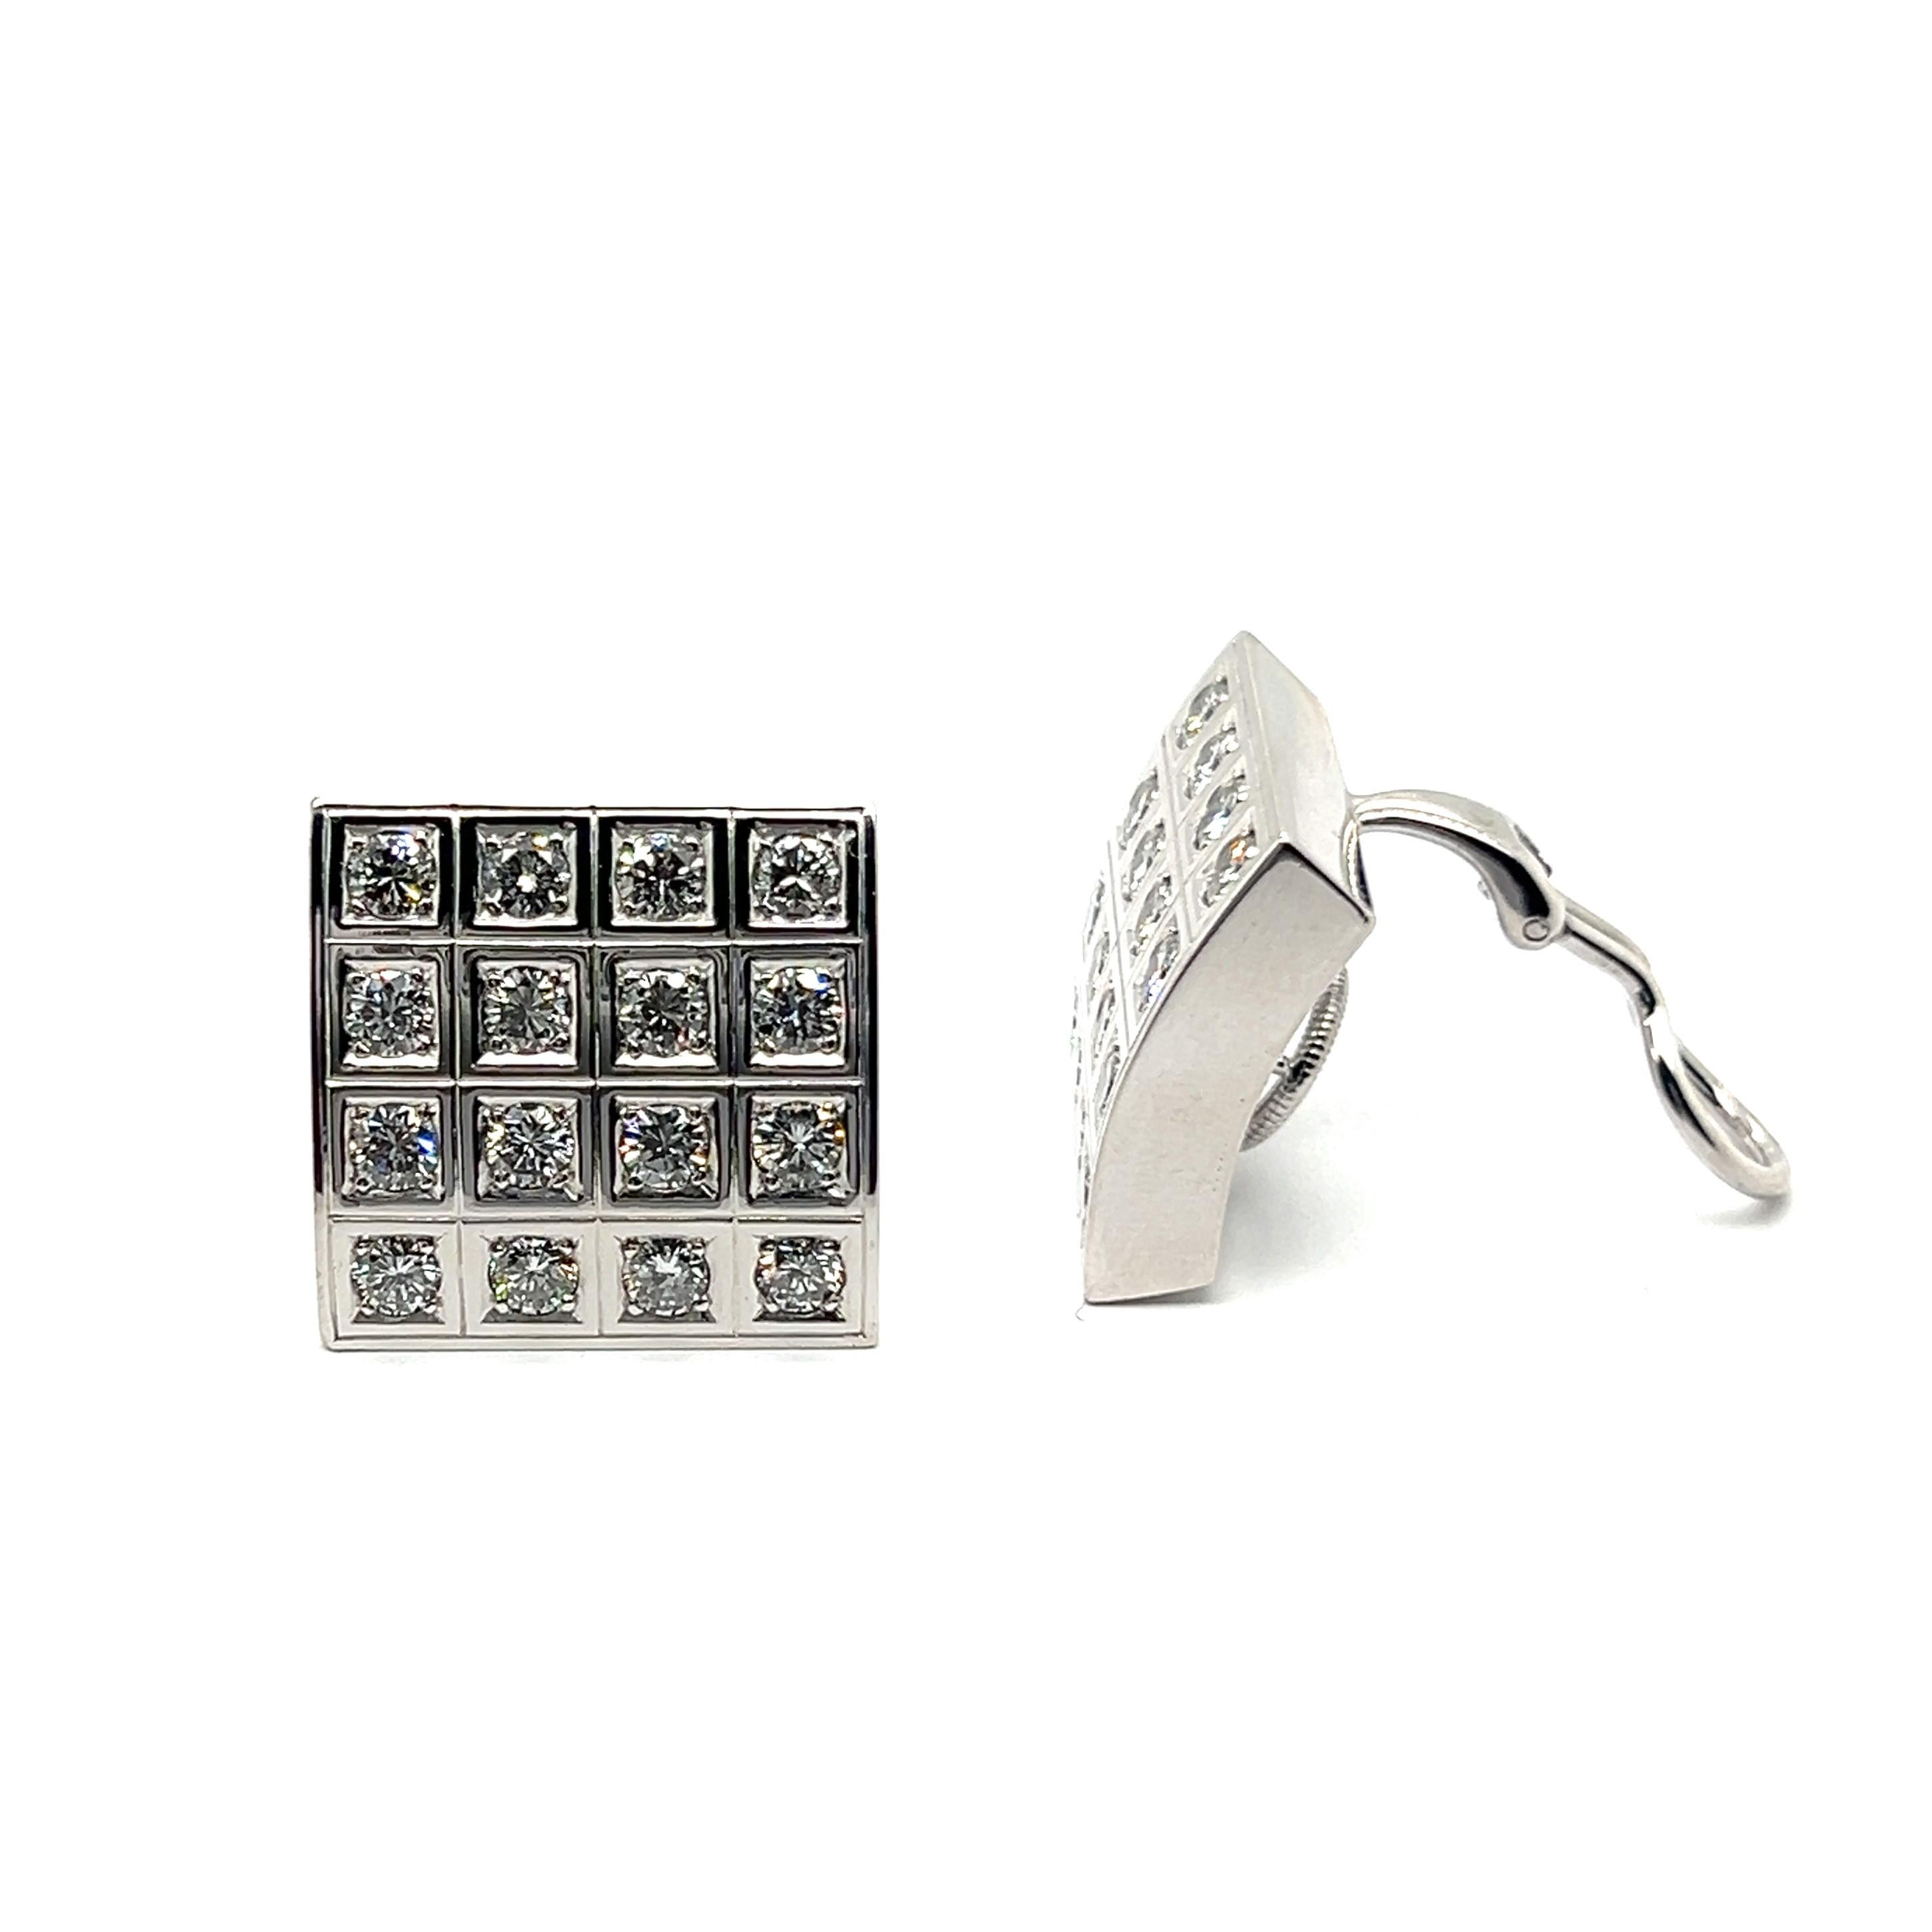  Bold Graphic Earrings with Diamonds in 18 Karat White Gold by Majo Fruithof 7